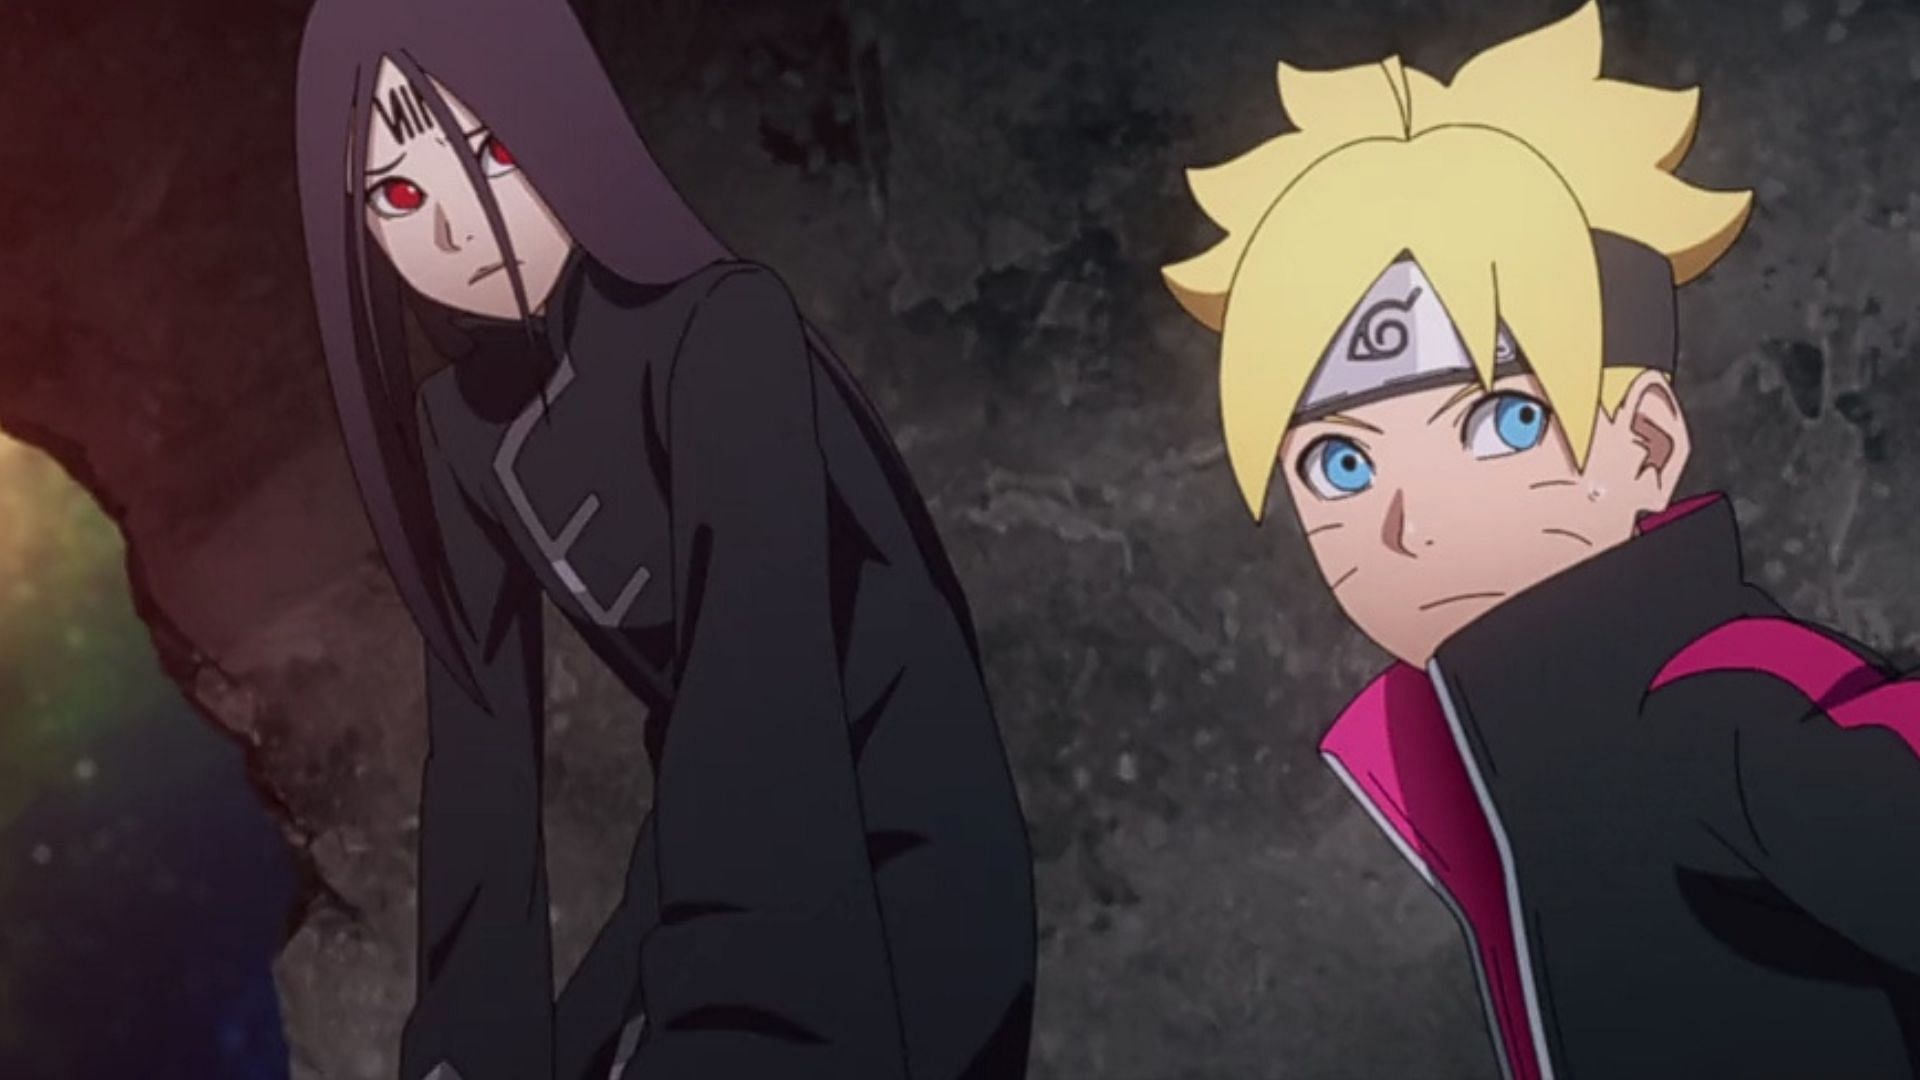 Boruto: Naruto Next Generations 1×281 Review – “The Eighth Truth